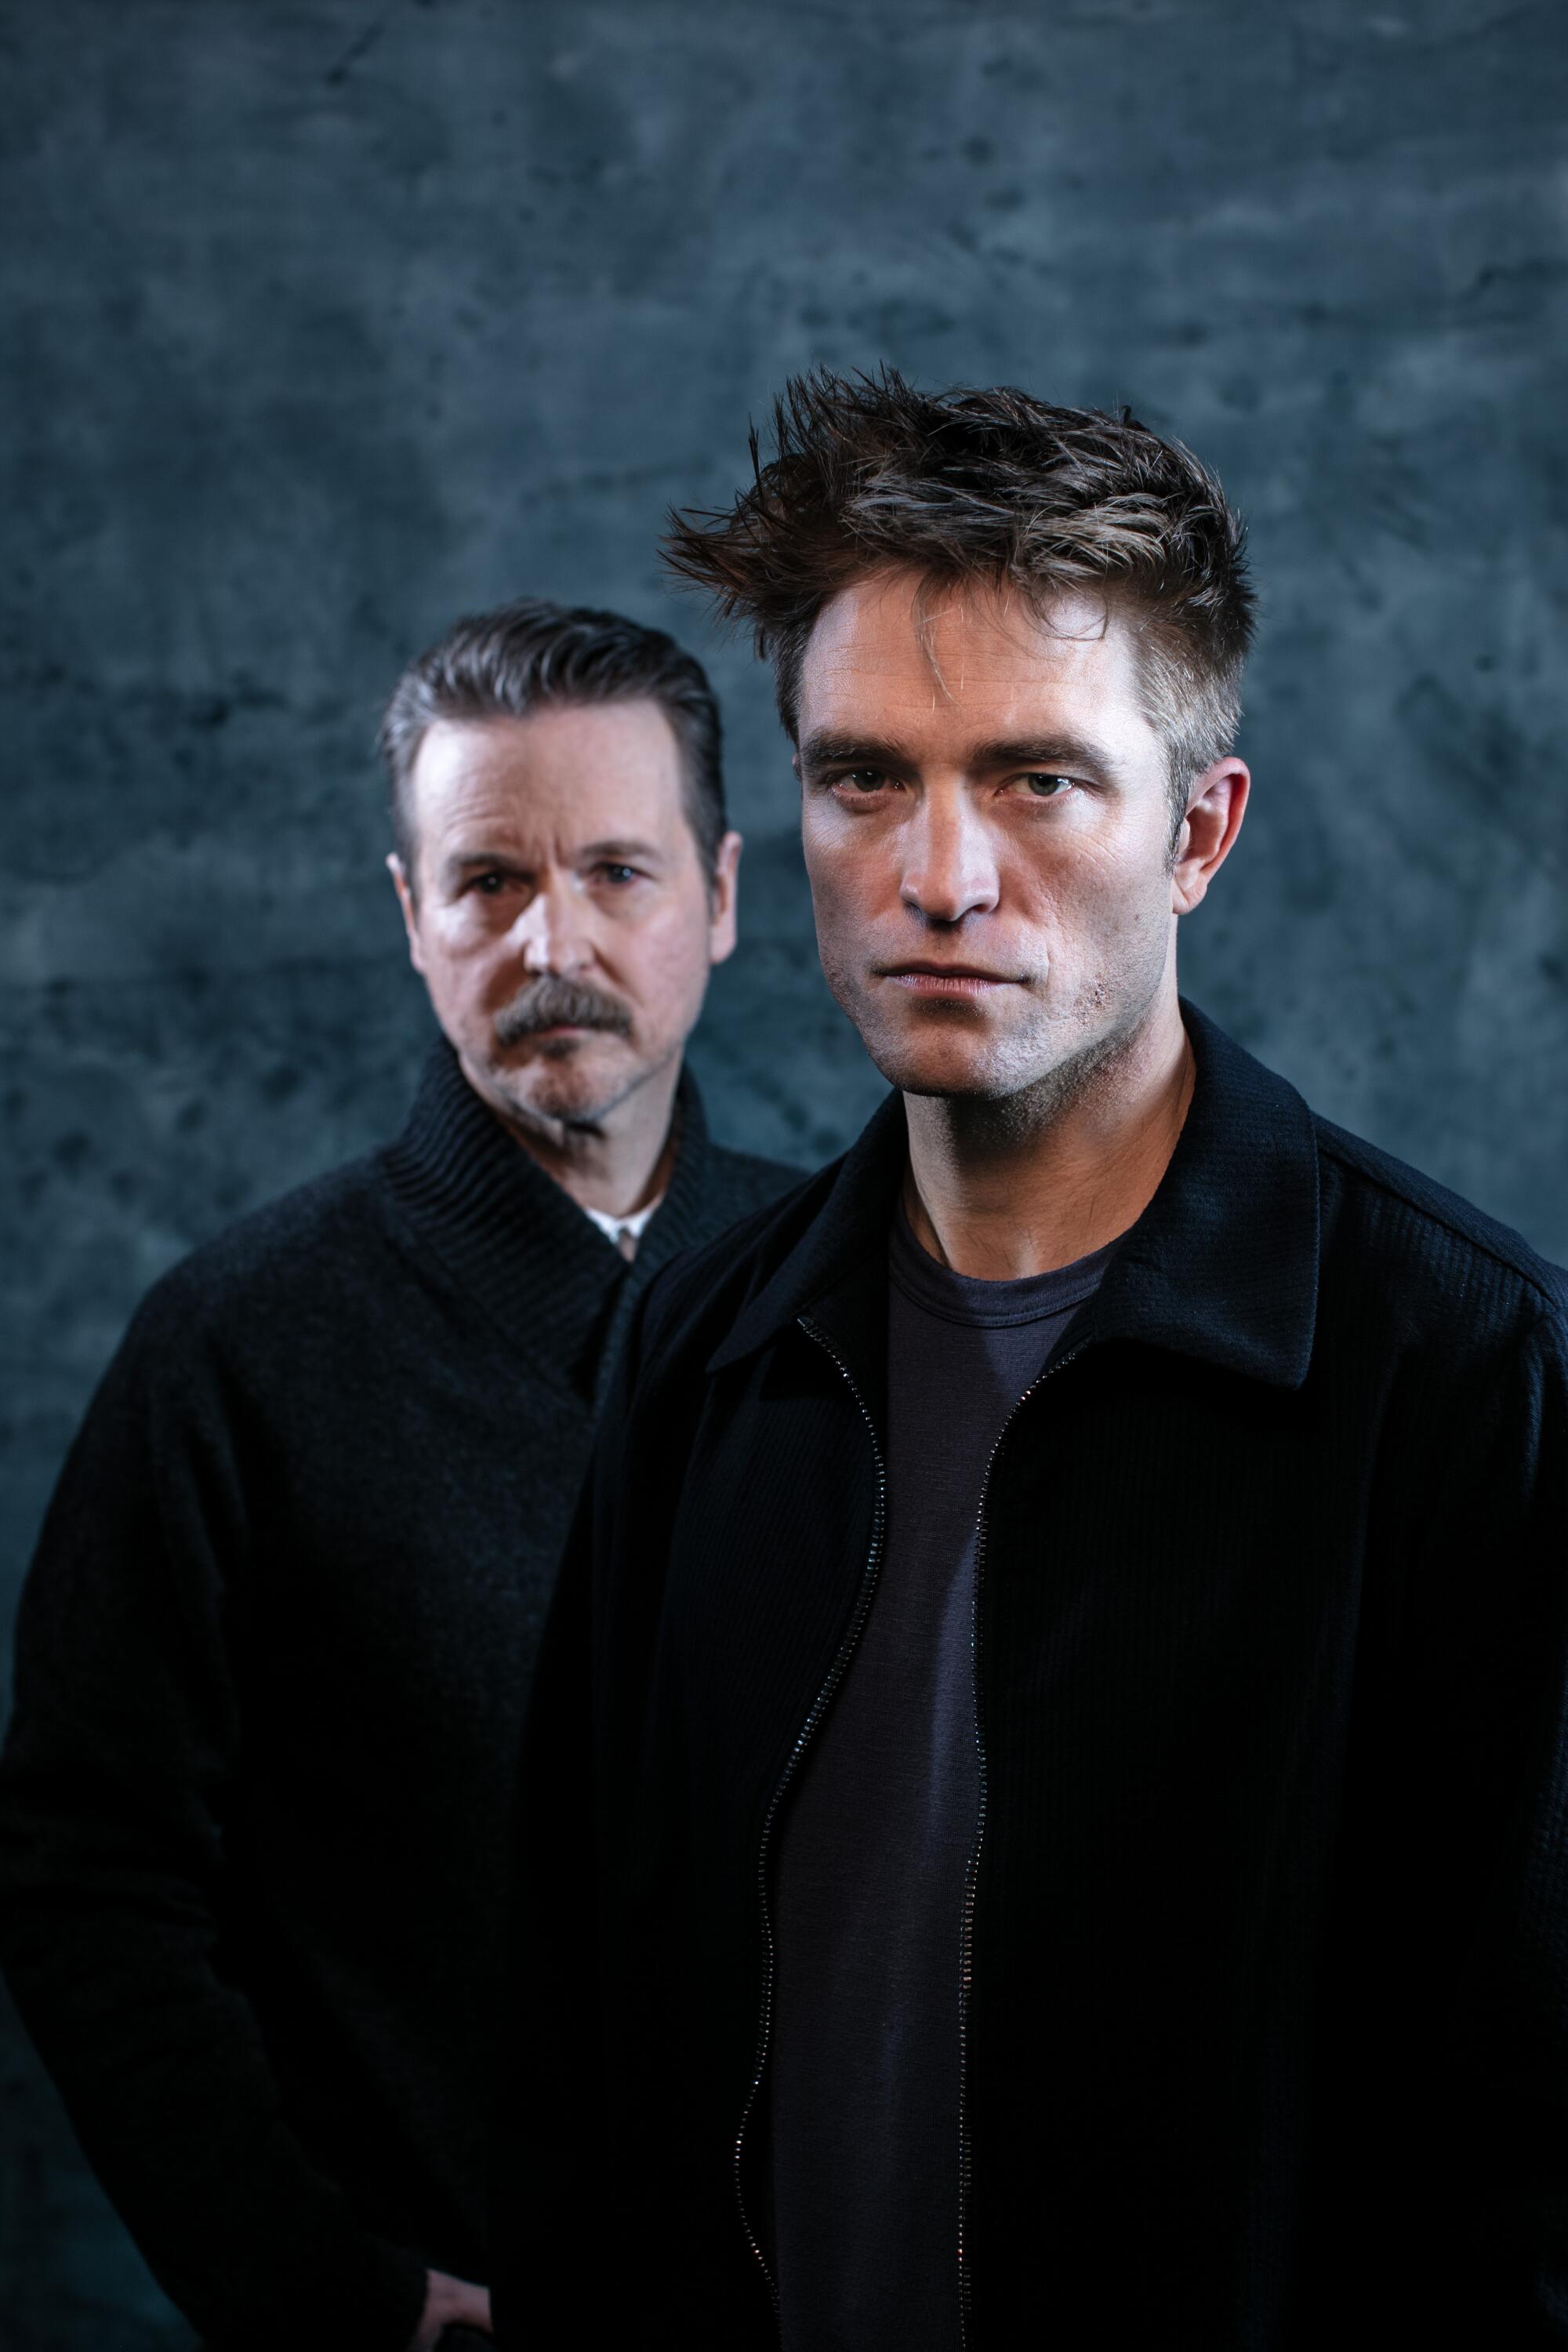 Robert Pattinson, right, and director Matt Reeves, left, pose for a portrait.